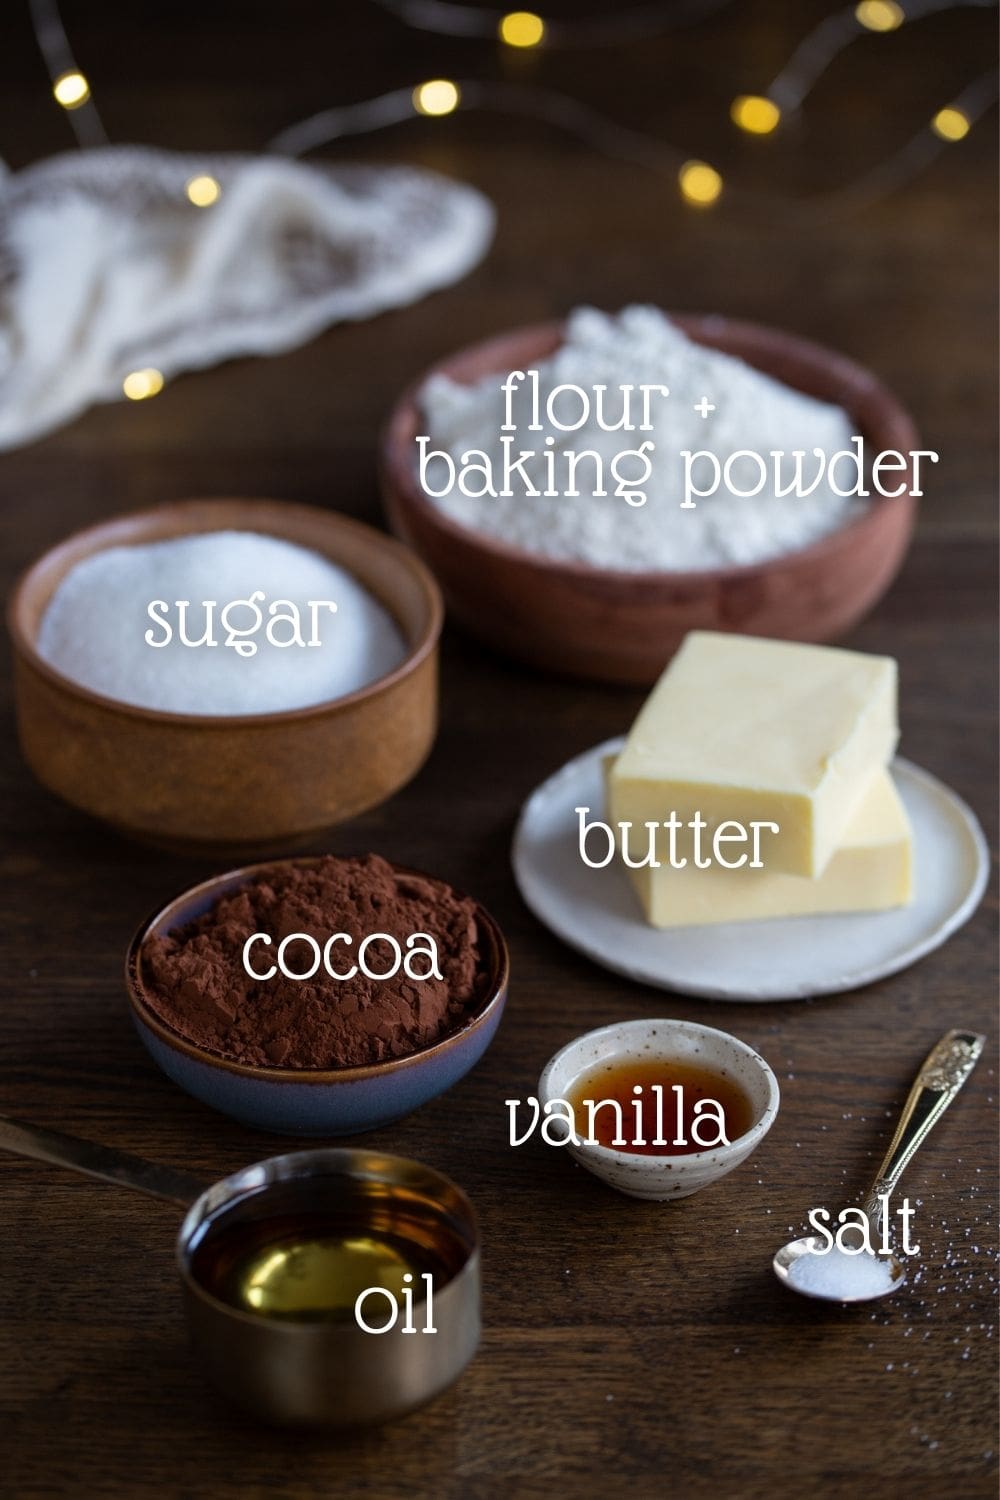 The ingredients needed for the recipe.